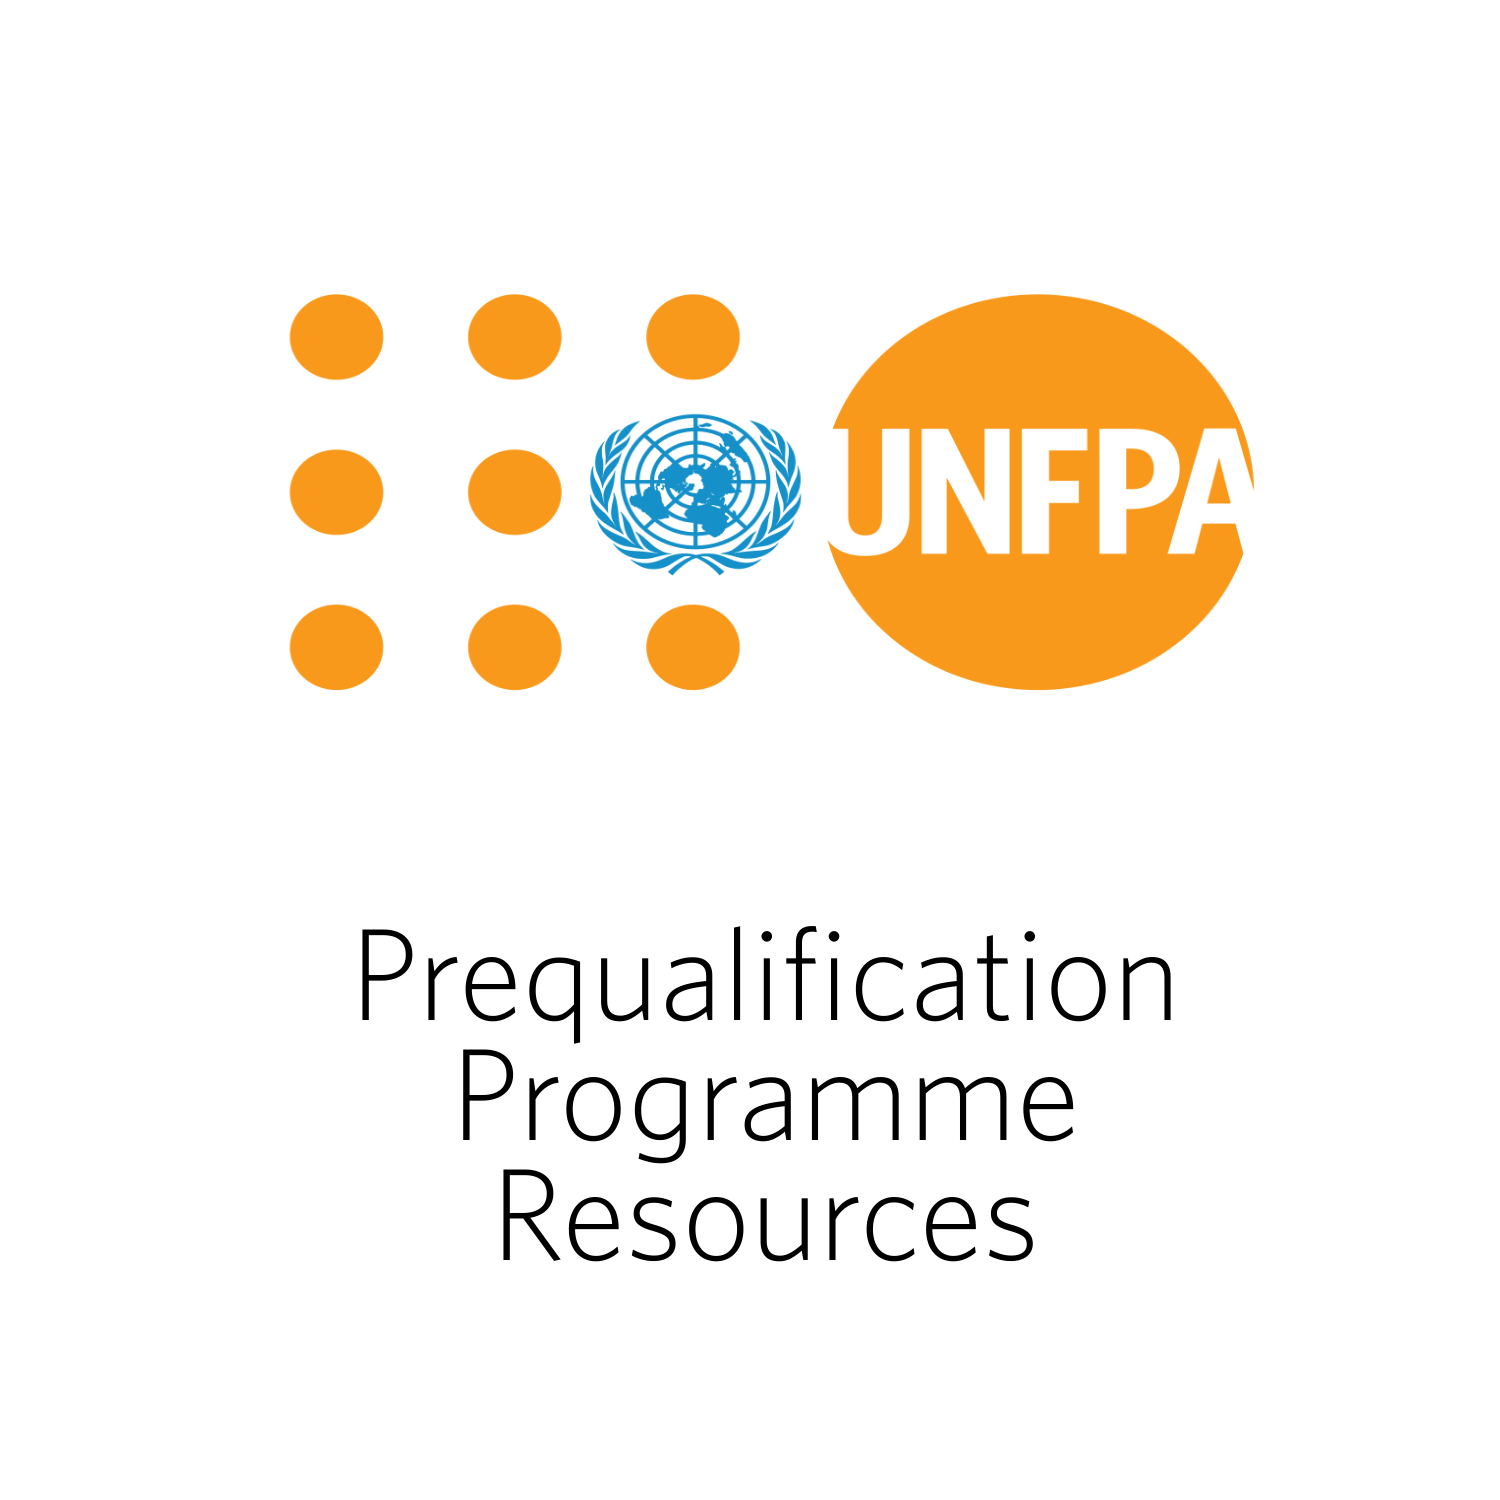 UNFPA Prequalification Programme Resources